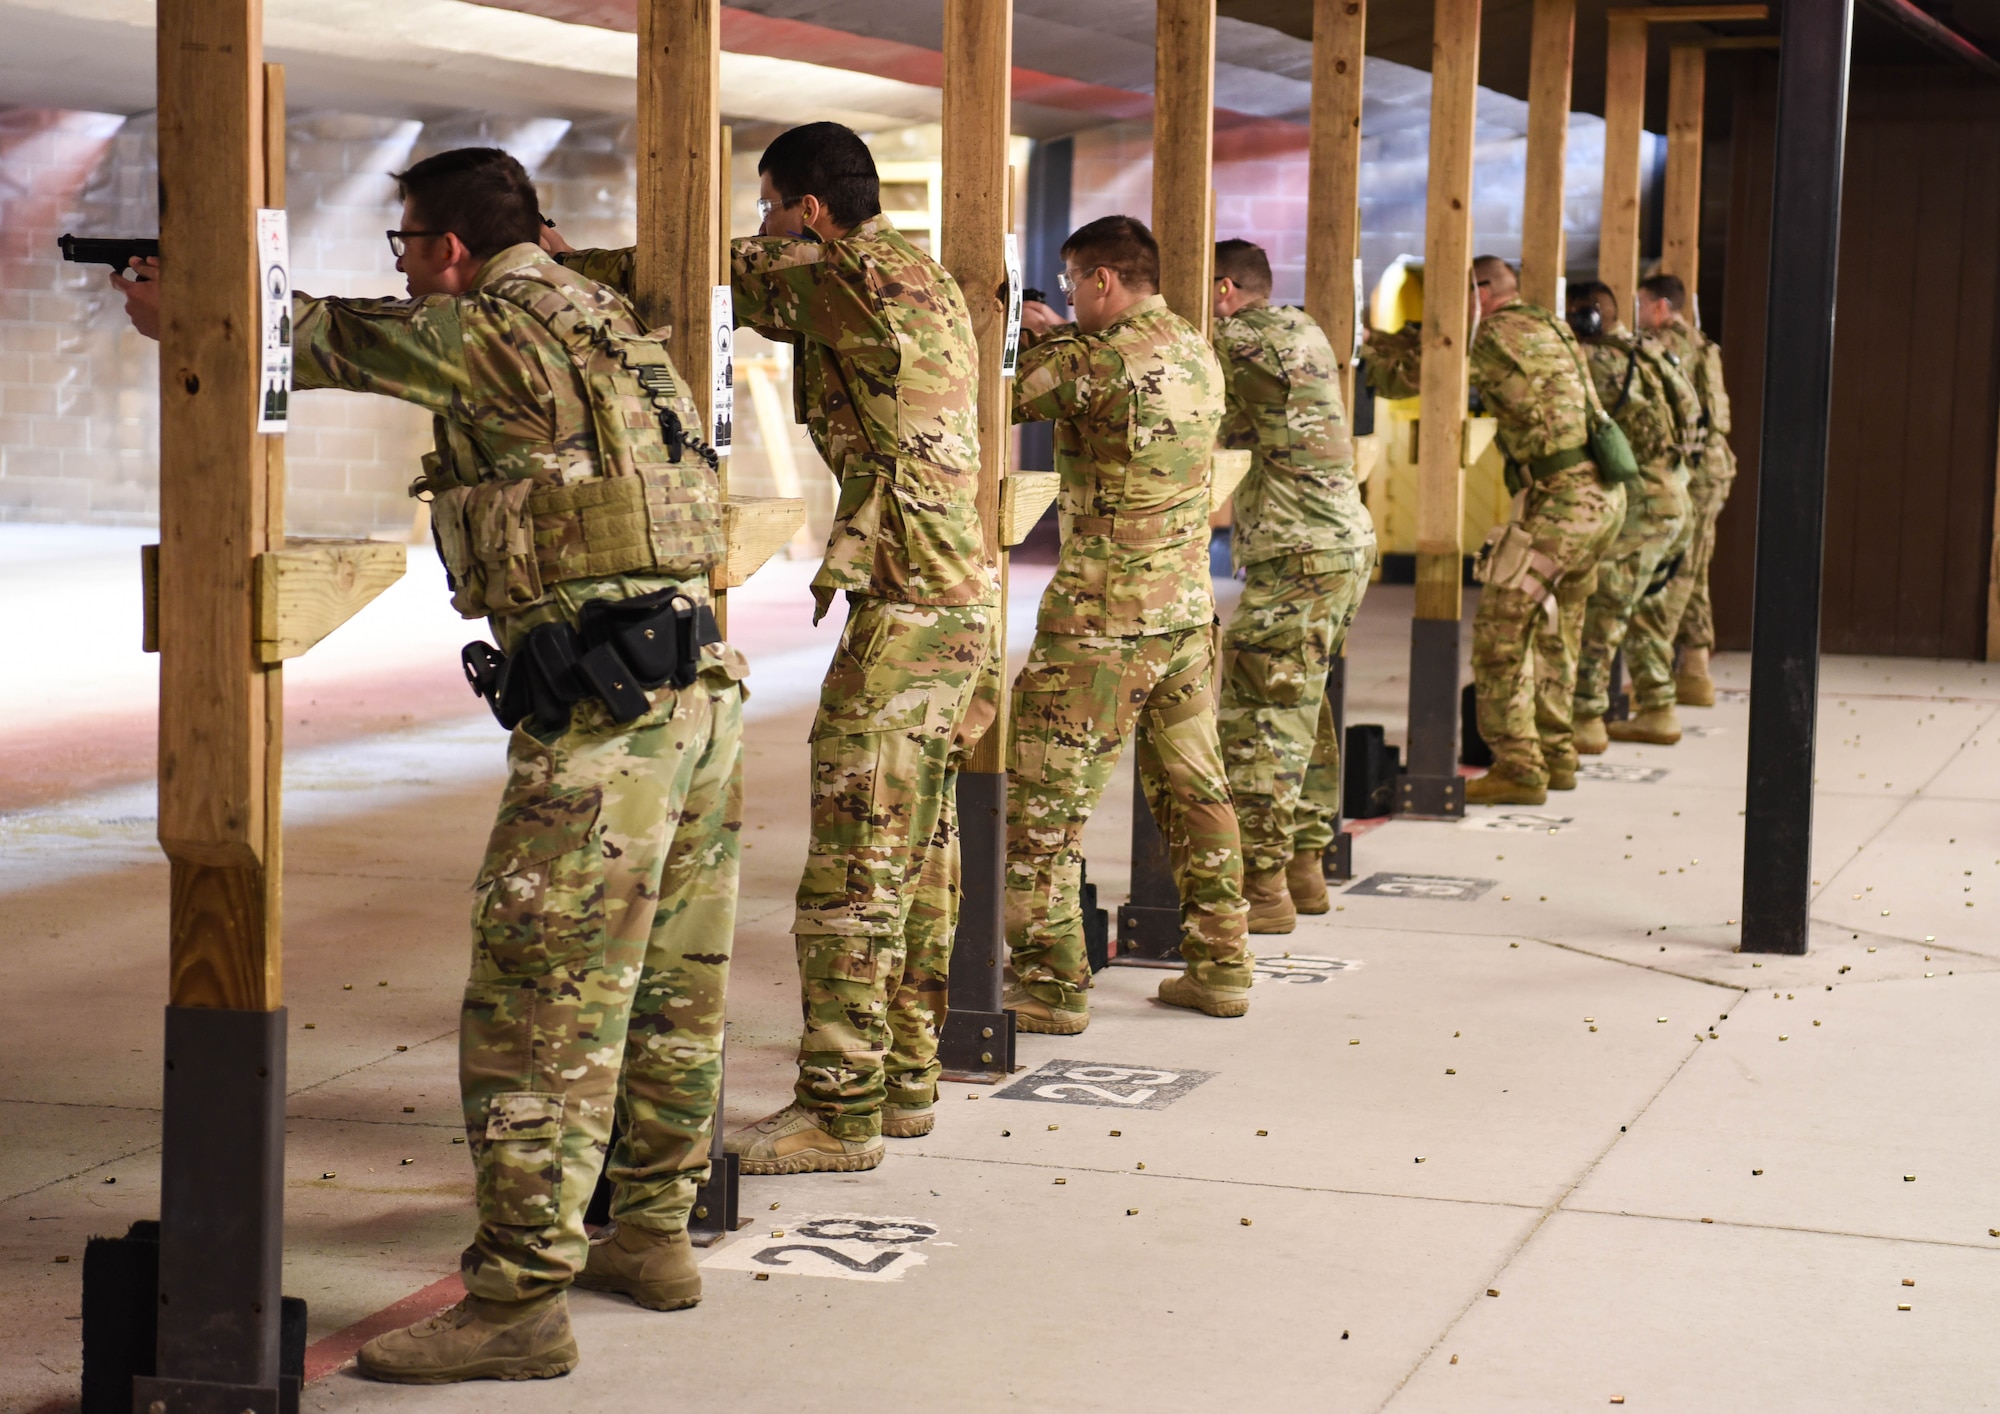 Defenders from the 90th Security Forces Group aim their weapons March 23, 2018, at the Combat Arms Training and Maintenance range on F.E. Warren Air Force Base Wyo. Security forces members have to complete sustainment firing, such as Shoot Move Communicate. Combat Arms Training and Maintenance is a vital component to keeping our Airmen trained and qualified on the weapon systems they are issued whether providing security on home station or deployed. (U.S. Air Force photo by Airman 1st Class Braydon Williams)